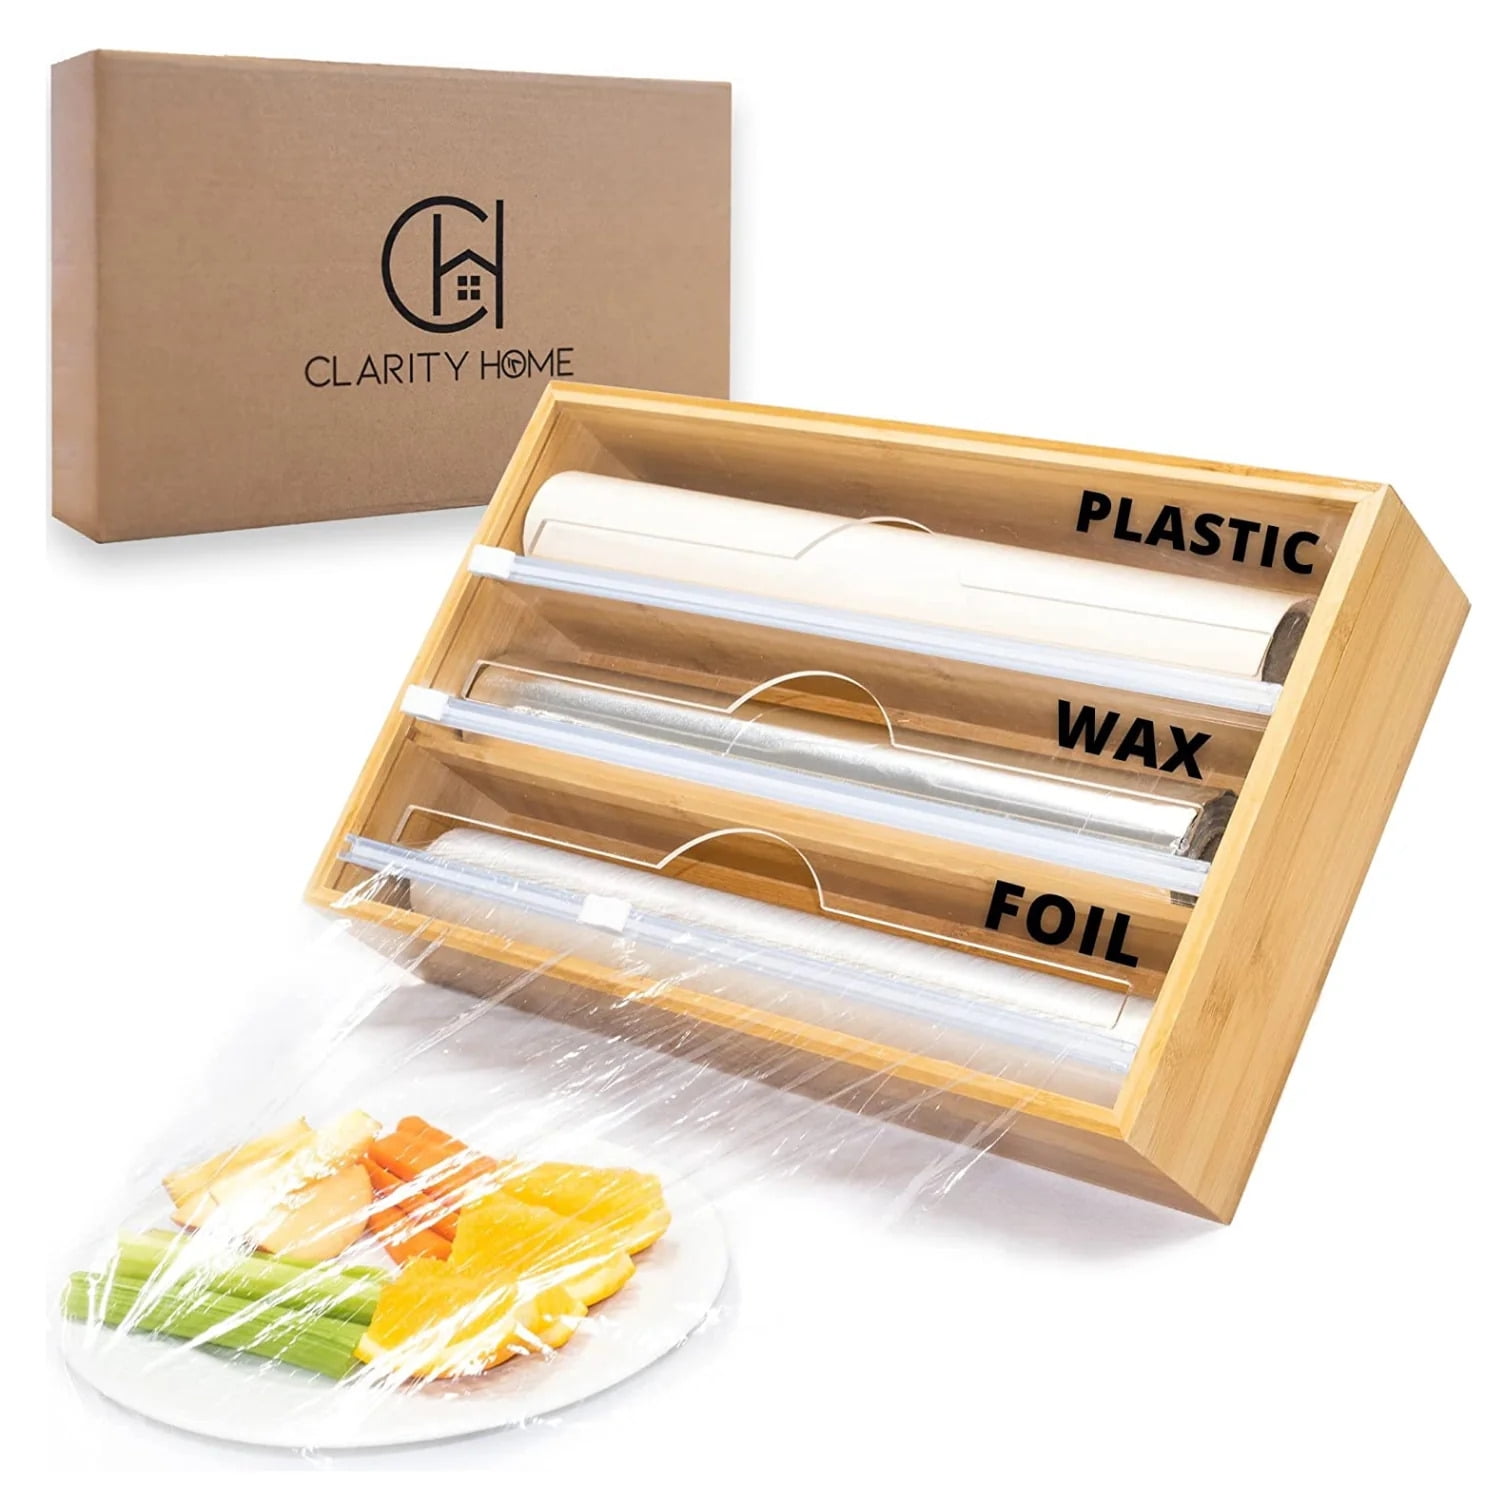 3 in 1 Foil and Plastic Wrap Organizer with Paper Towel Holder，Magnetic  Plastic